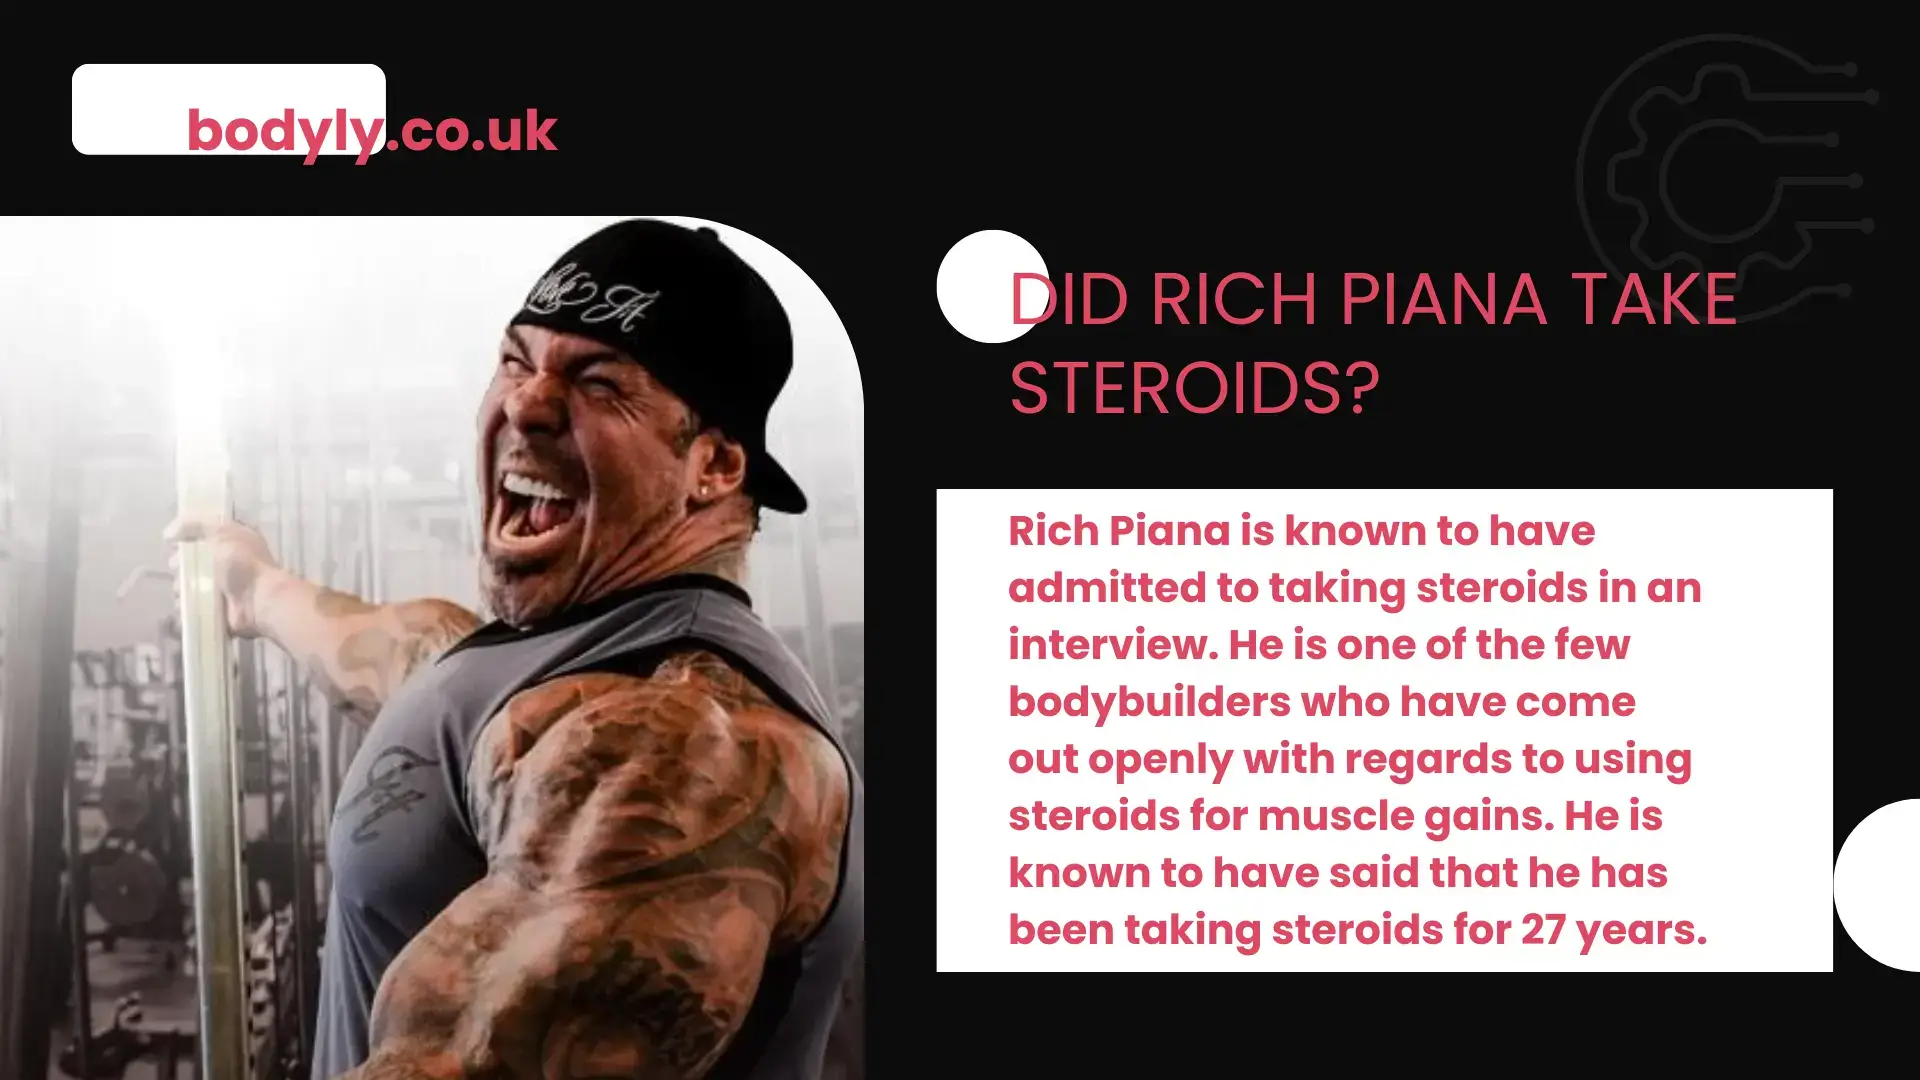 Was rich piana natural or on steroids